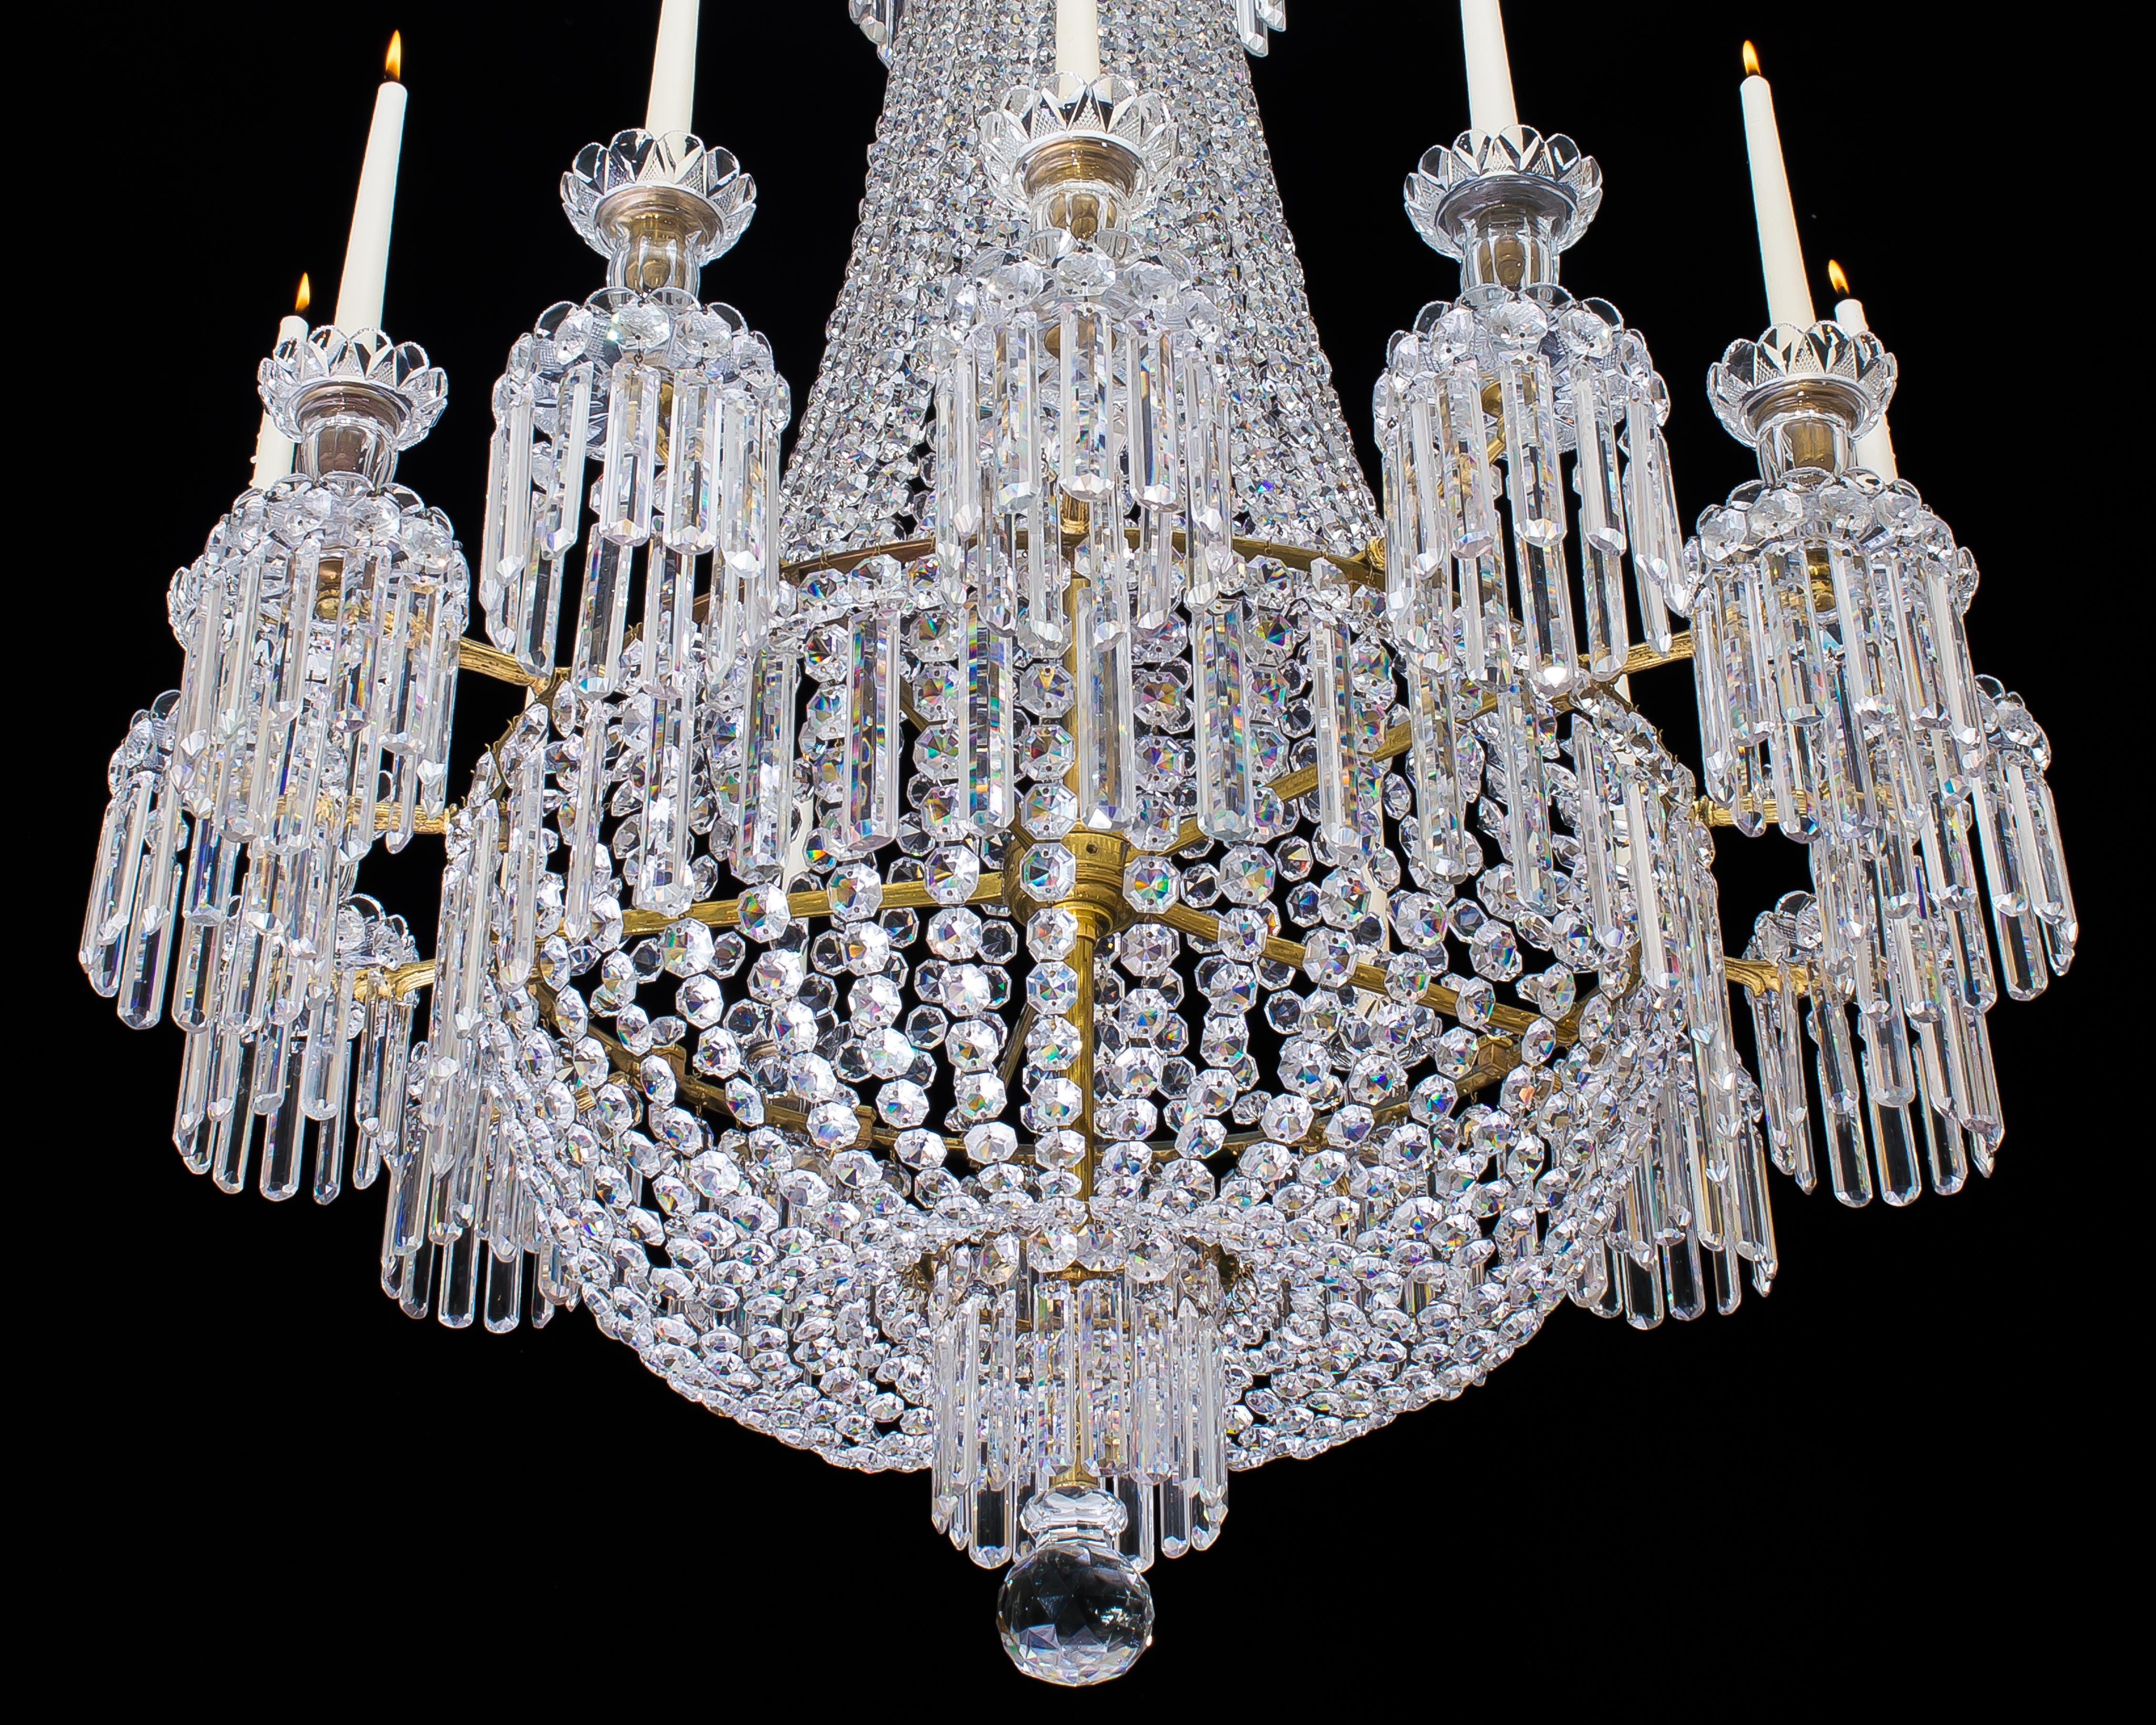 A fine gilt bronzed and cut crystal Regency chandelier of Classic tent and basket design the upper tiers formed of three graduated drop hung rings with tent chains cascading to the main band, issuing fourteen finely cast candle branches these